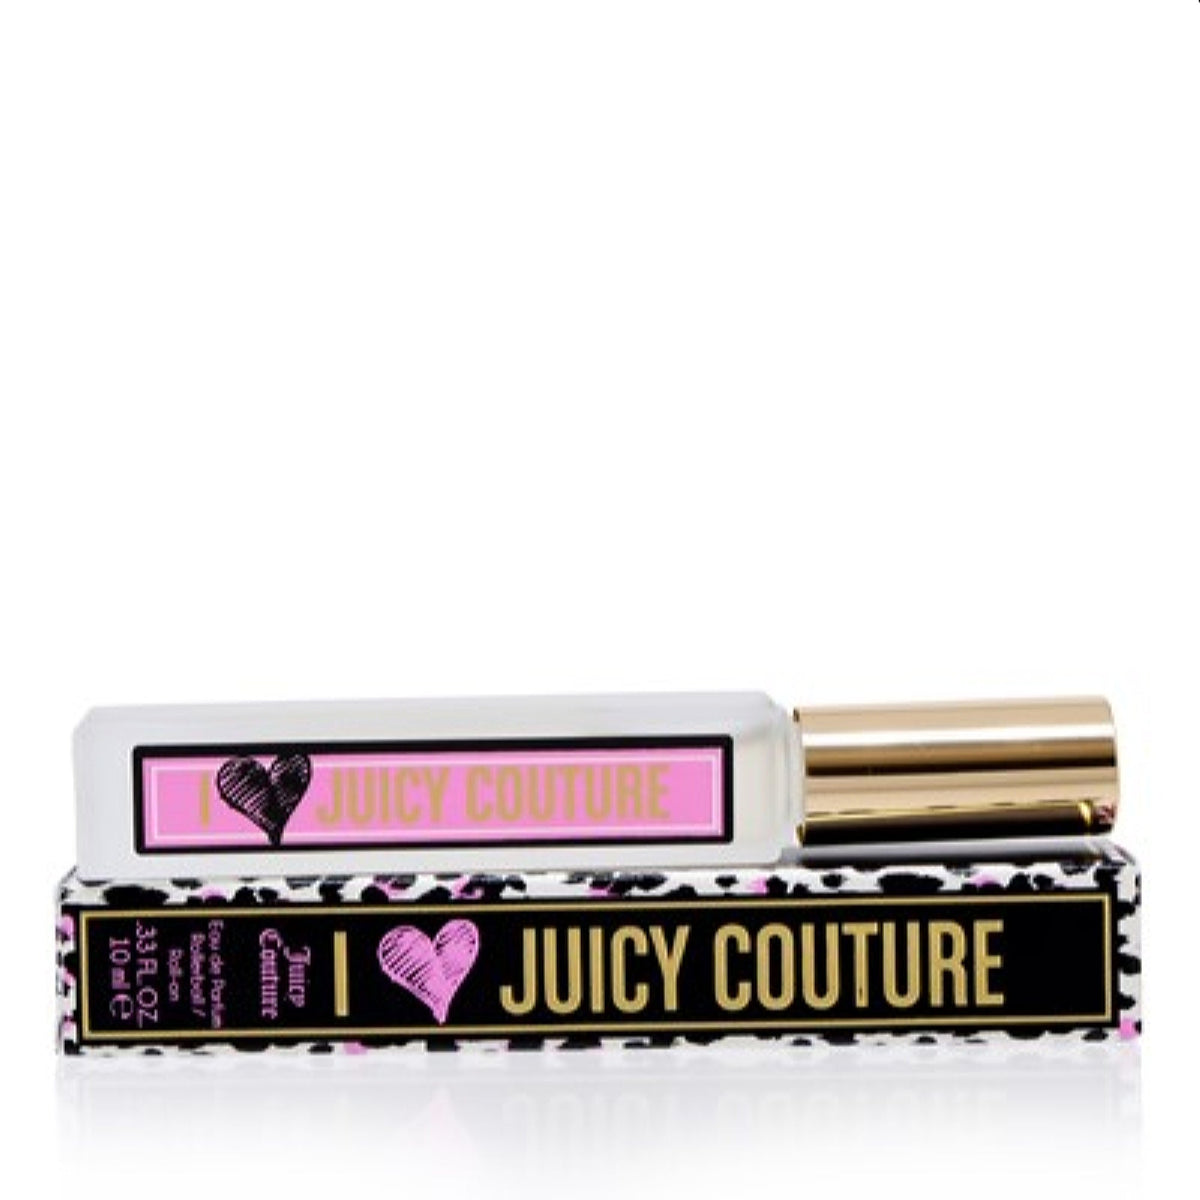 I Love Juicy Couture Juicy Couture Edp Rollerball Mini 0.33 Oz (10.0 Ml) For Women  A0103626